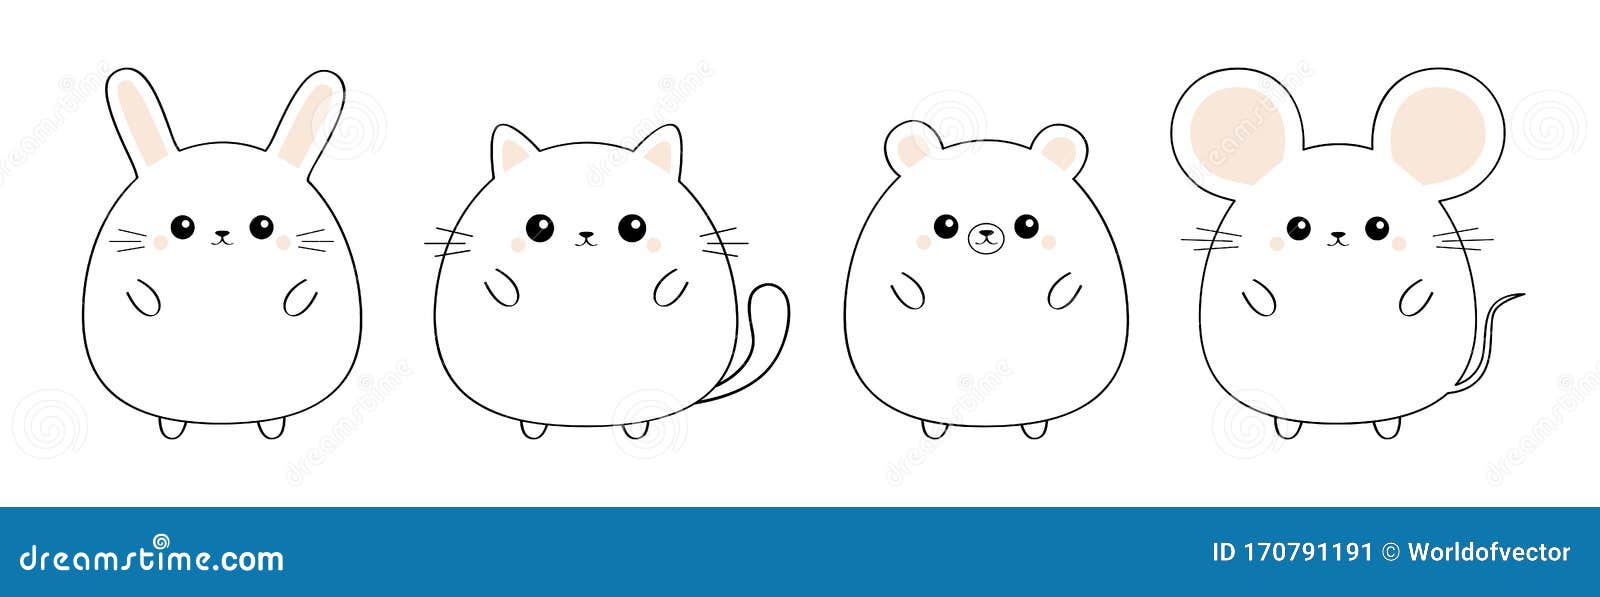 Mouse, Cat Kitten Kitty, Bear, Rabbit Hare Icon Set. Black Contour  Silhouette. Kawaii Animal. Doodle Linear Sketch Stock Vector - Illustration  of cute, background: 170791191